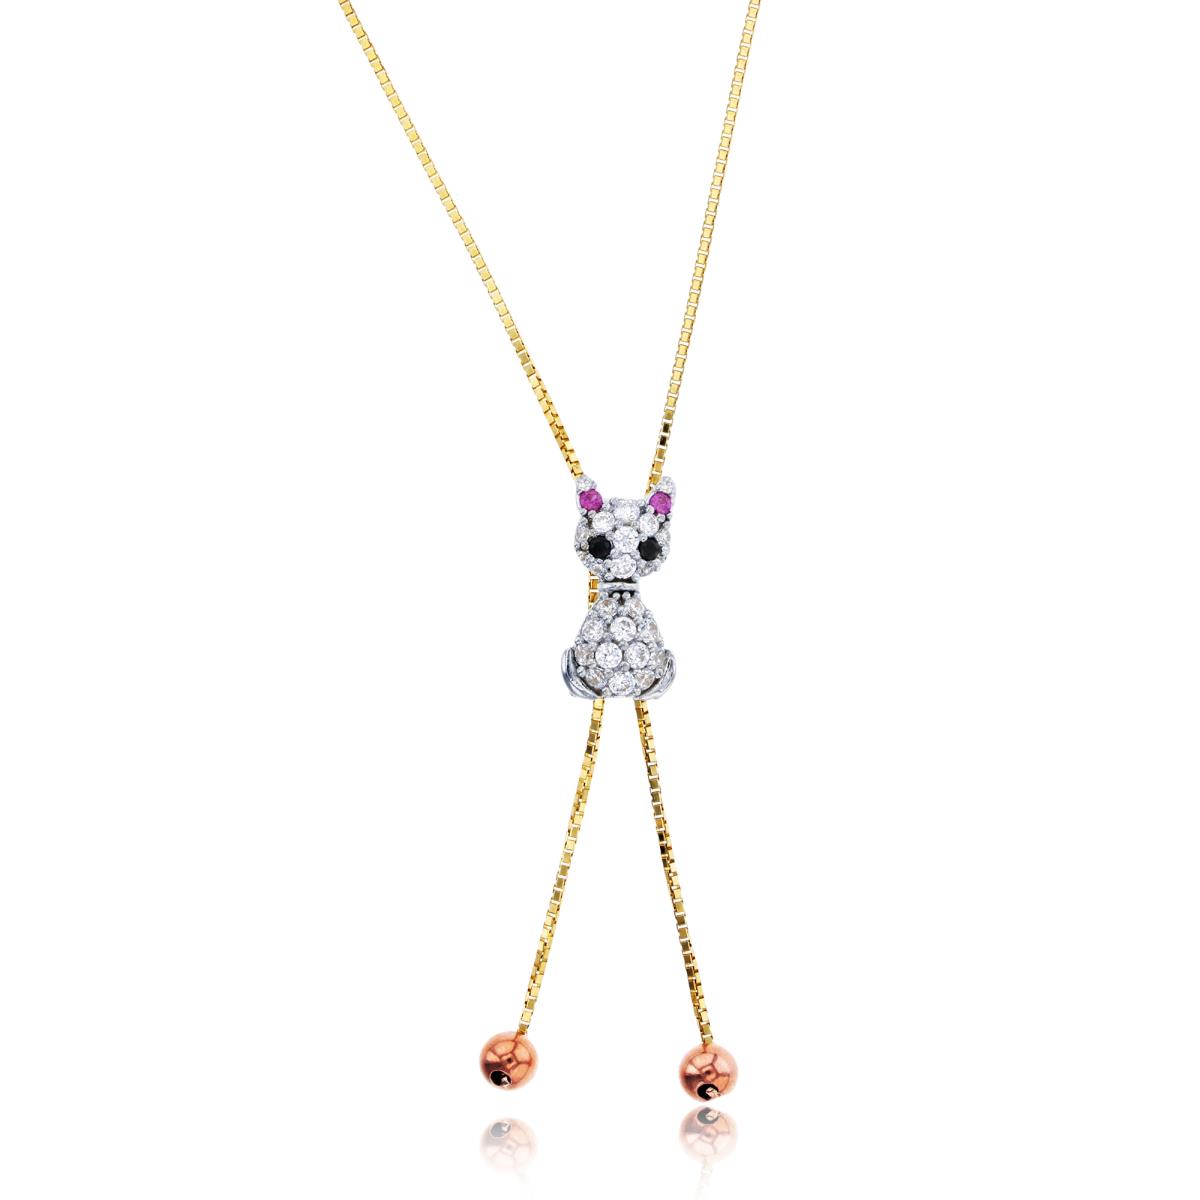 14K Tri-color Gold Dangling Cat 18" Adjustable Necklace with Cubic Zirconia